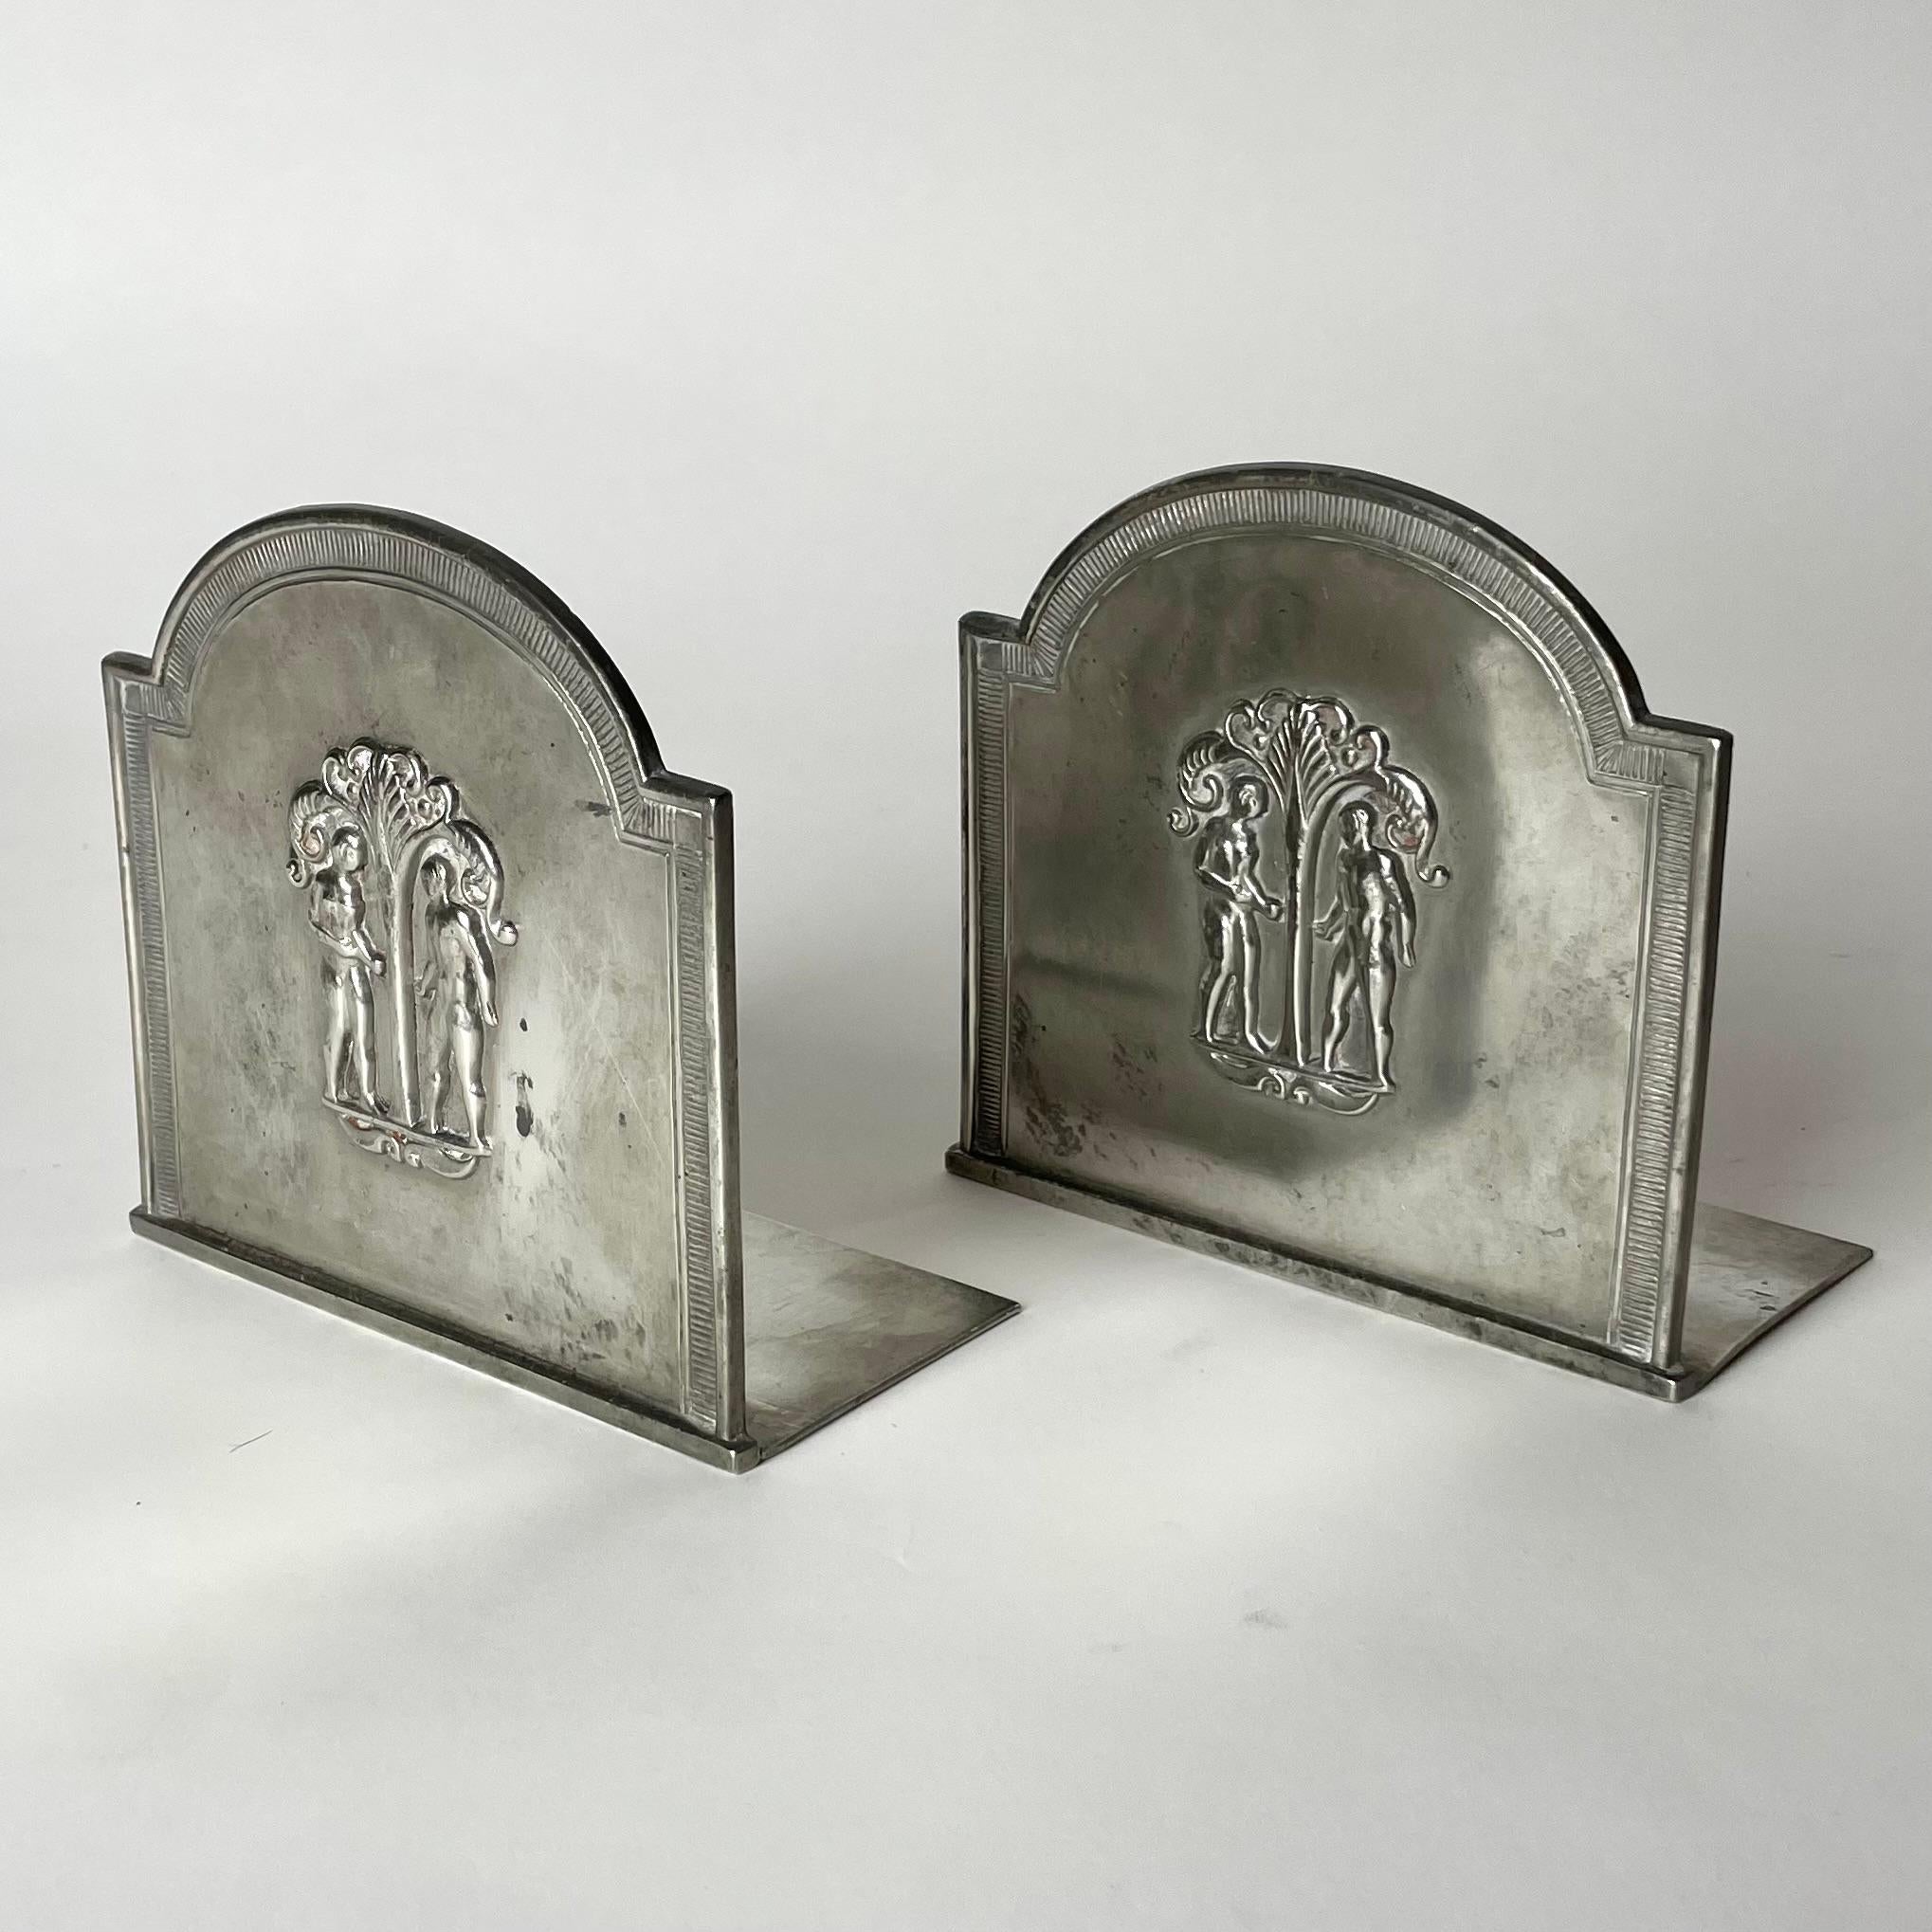 A beautiful Pair of Bookends in Pewter with decoration of Adam and Eve. Designed in 1930 by the famous designer Just Andersen (1884-1943) from Denmark and manufactured by the Swedish company GAB (Guldsmedsaktiebolaget).

Wear consistent with age and